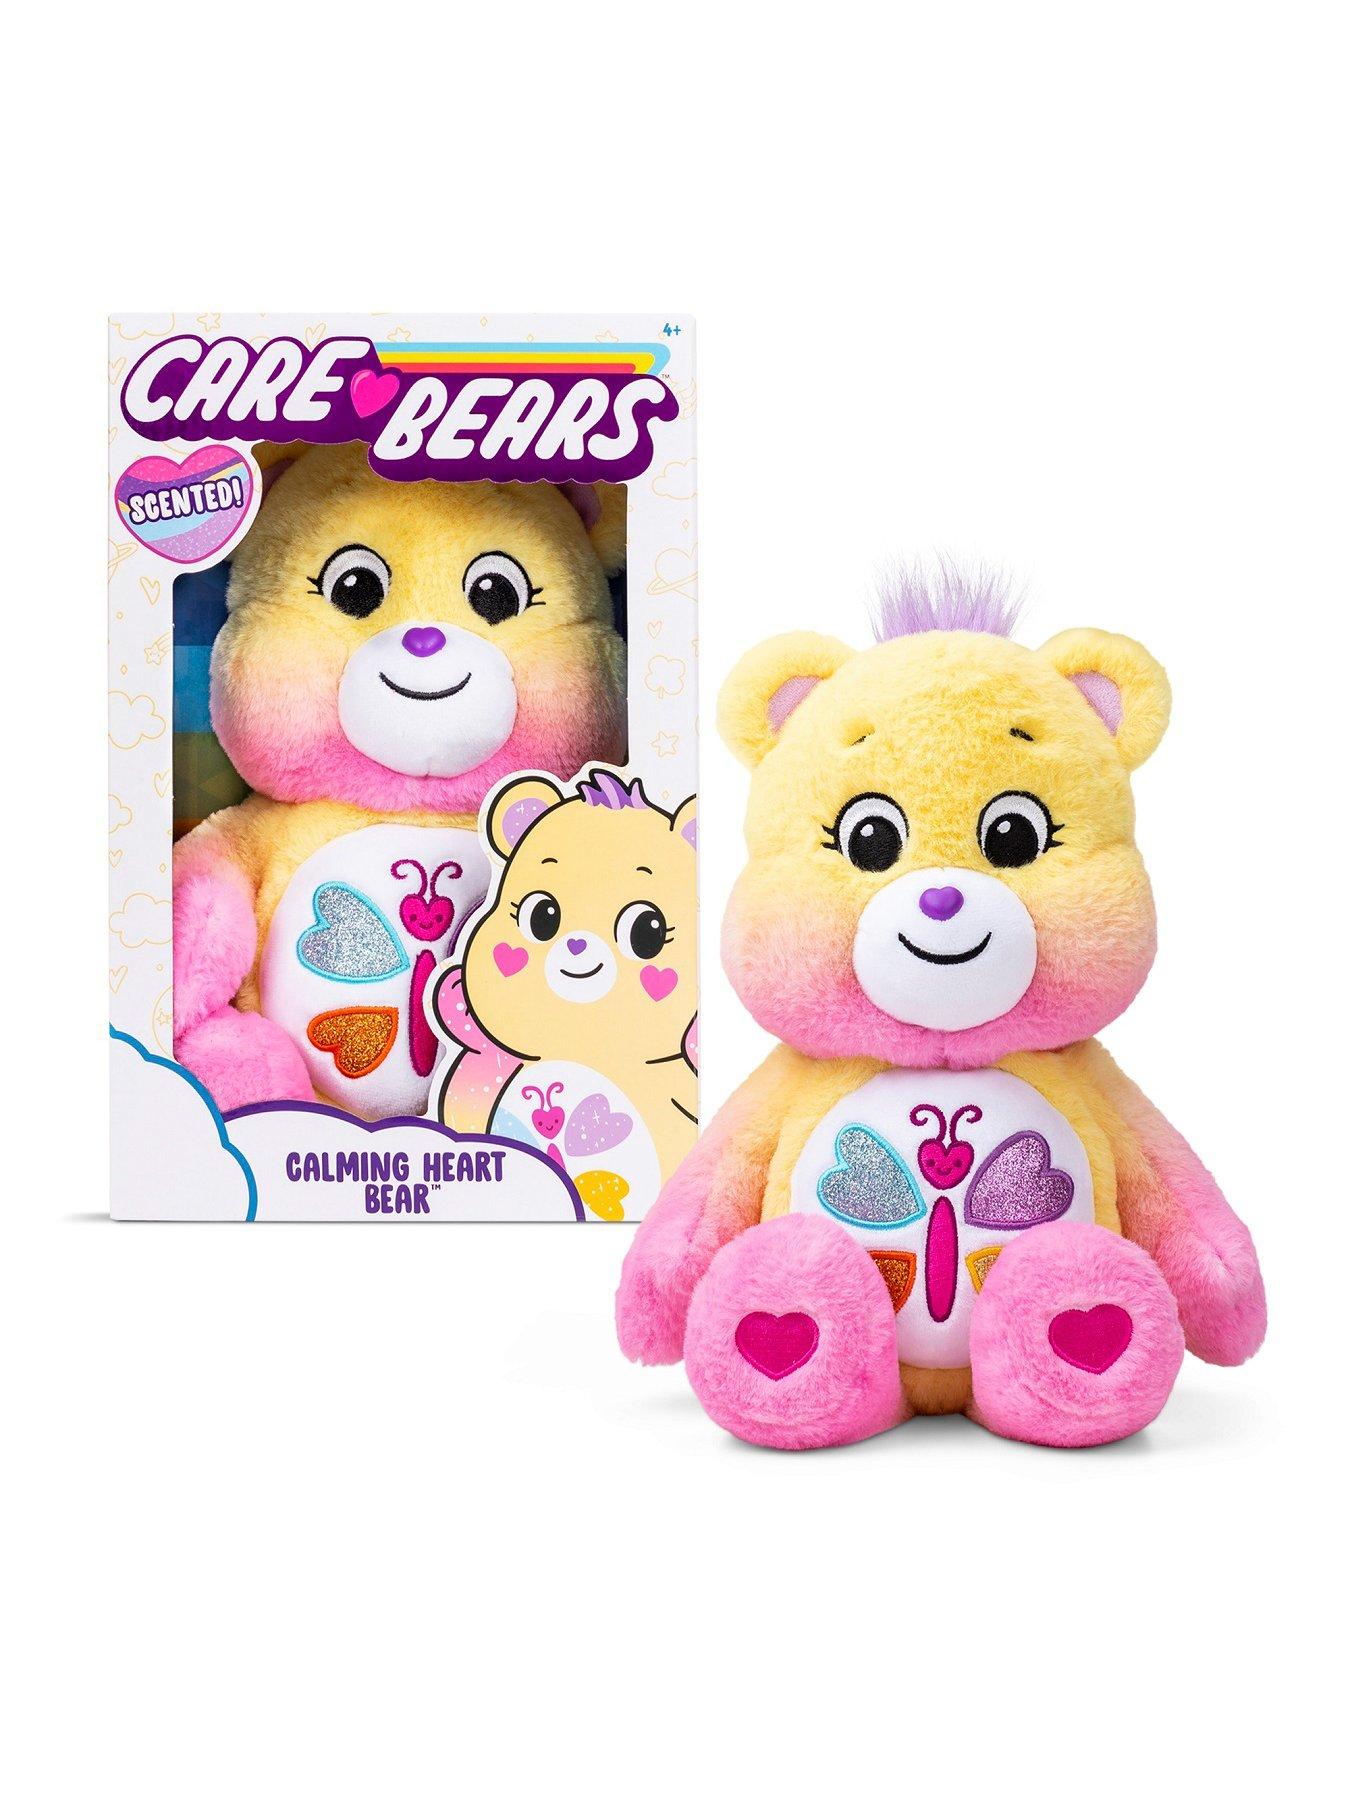 Care Bears Dare To Care Bear Gold Limited Edition 35cm (4+ Years)